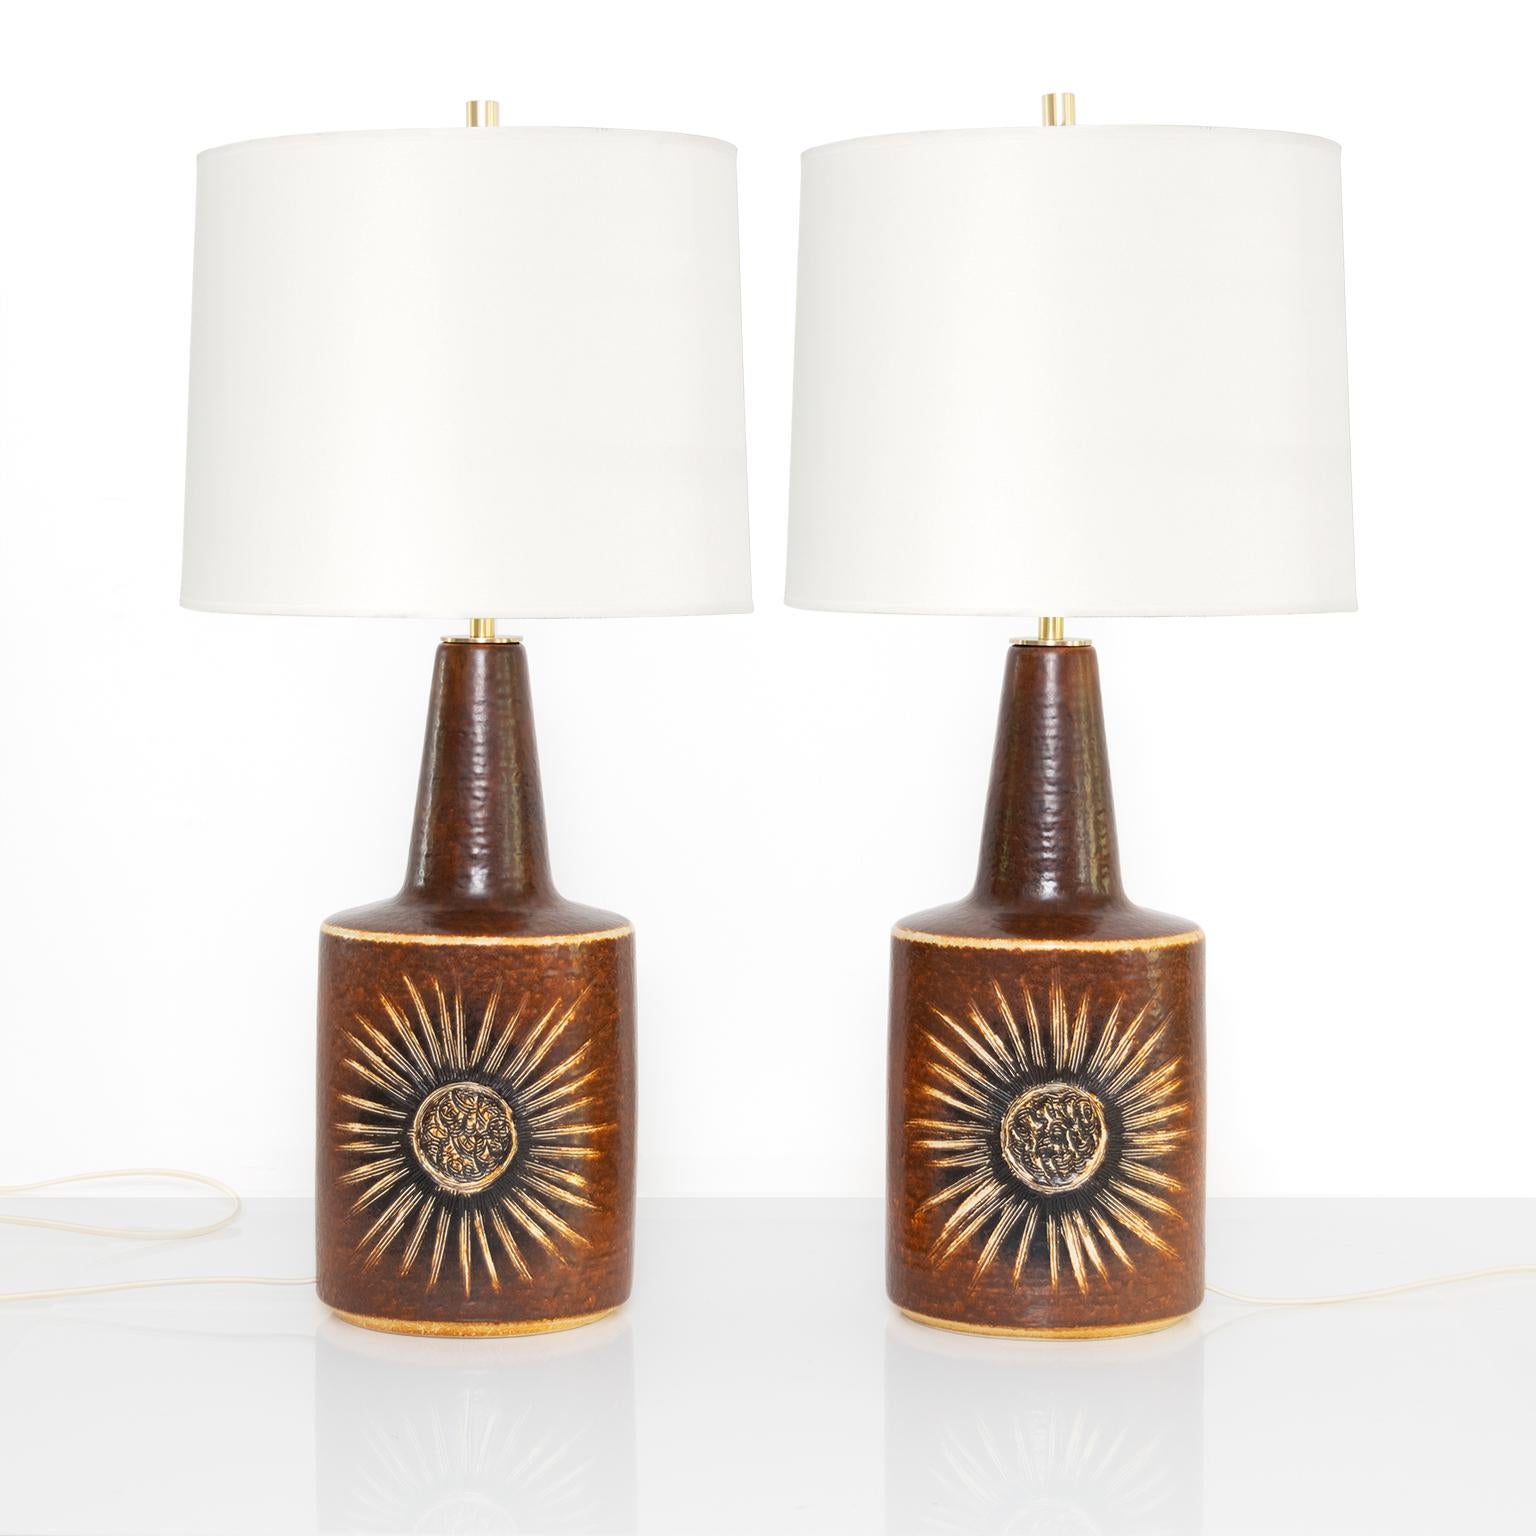 Large pair of Scandinavian modern ceramic lamps with incised flower motif on the front and reverse. Made by Soholm on the island of Bornholm, Denmark. Newly rewired with polished brass hardware, double socket clusters for use in the USA. 
Shades